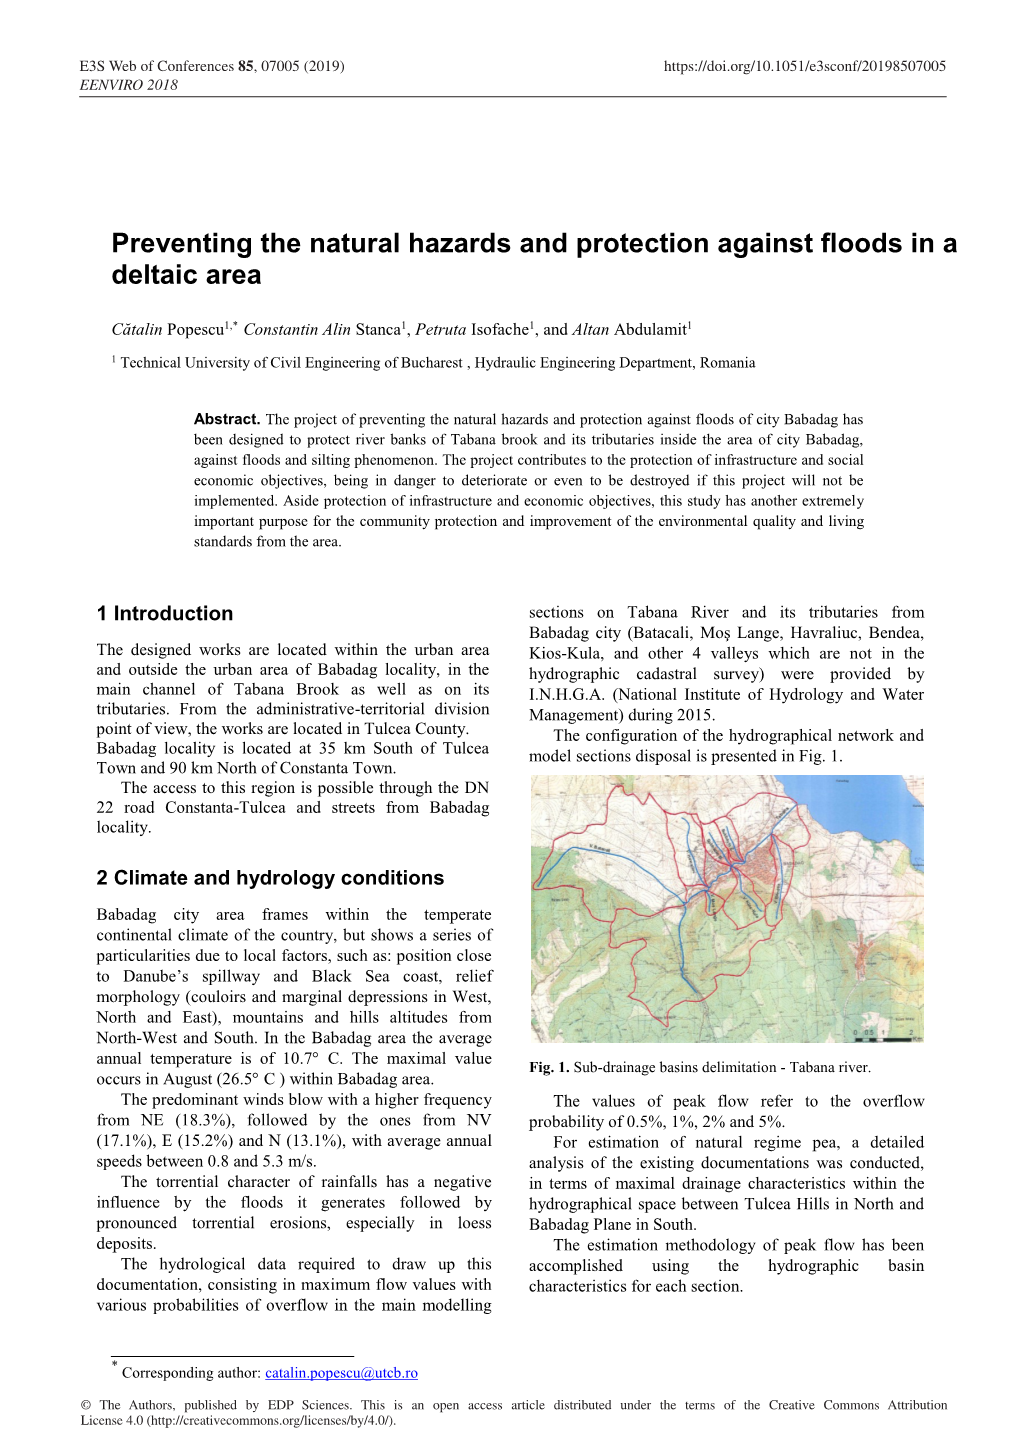 Preventing the Natural Hazards and Protection Against Floods in a Deltaic Area